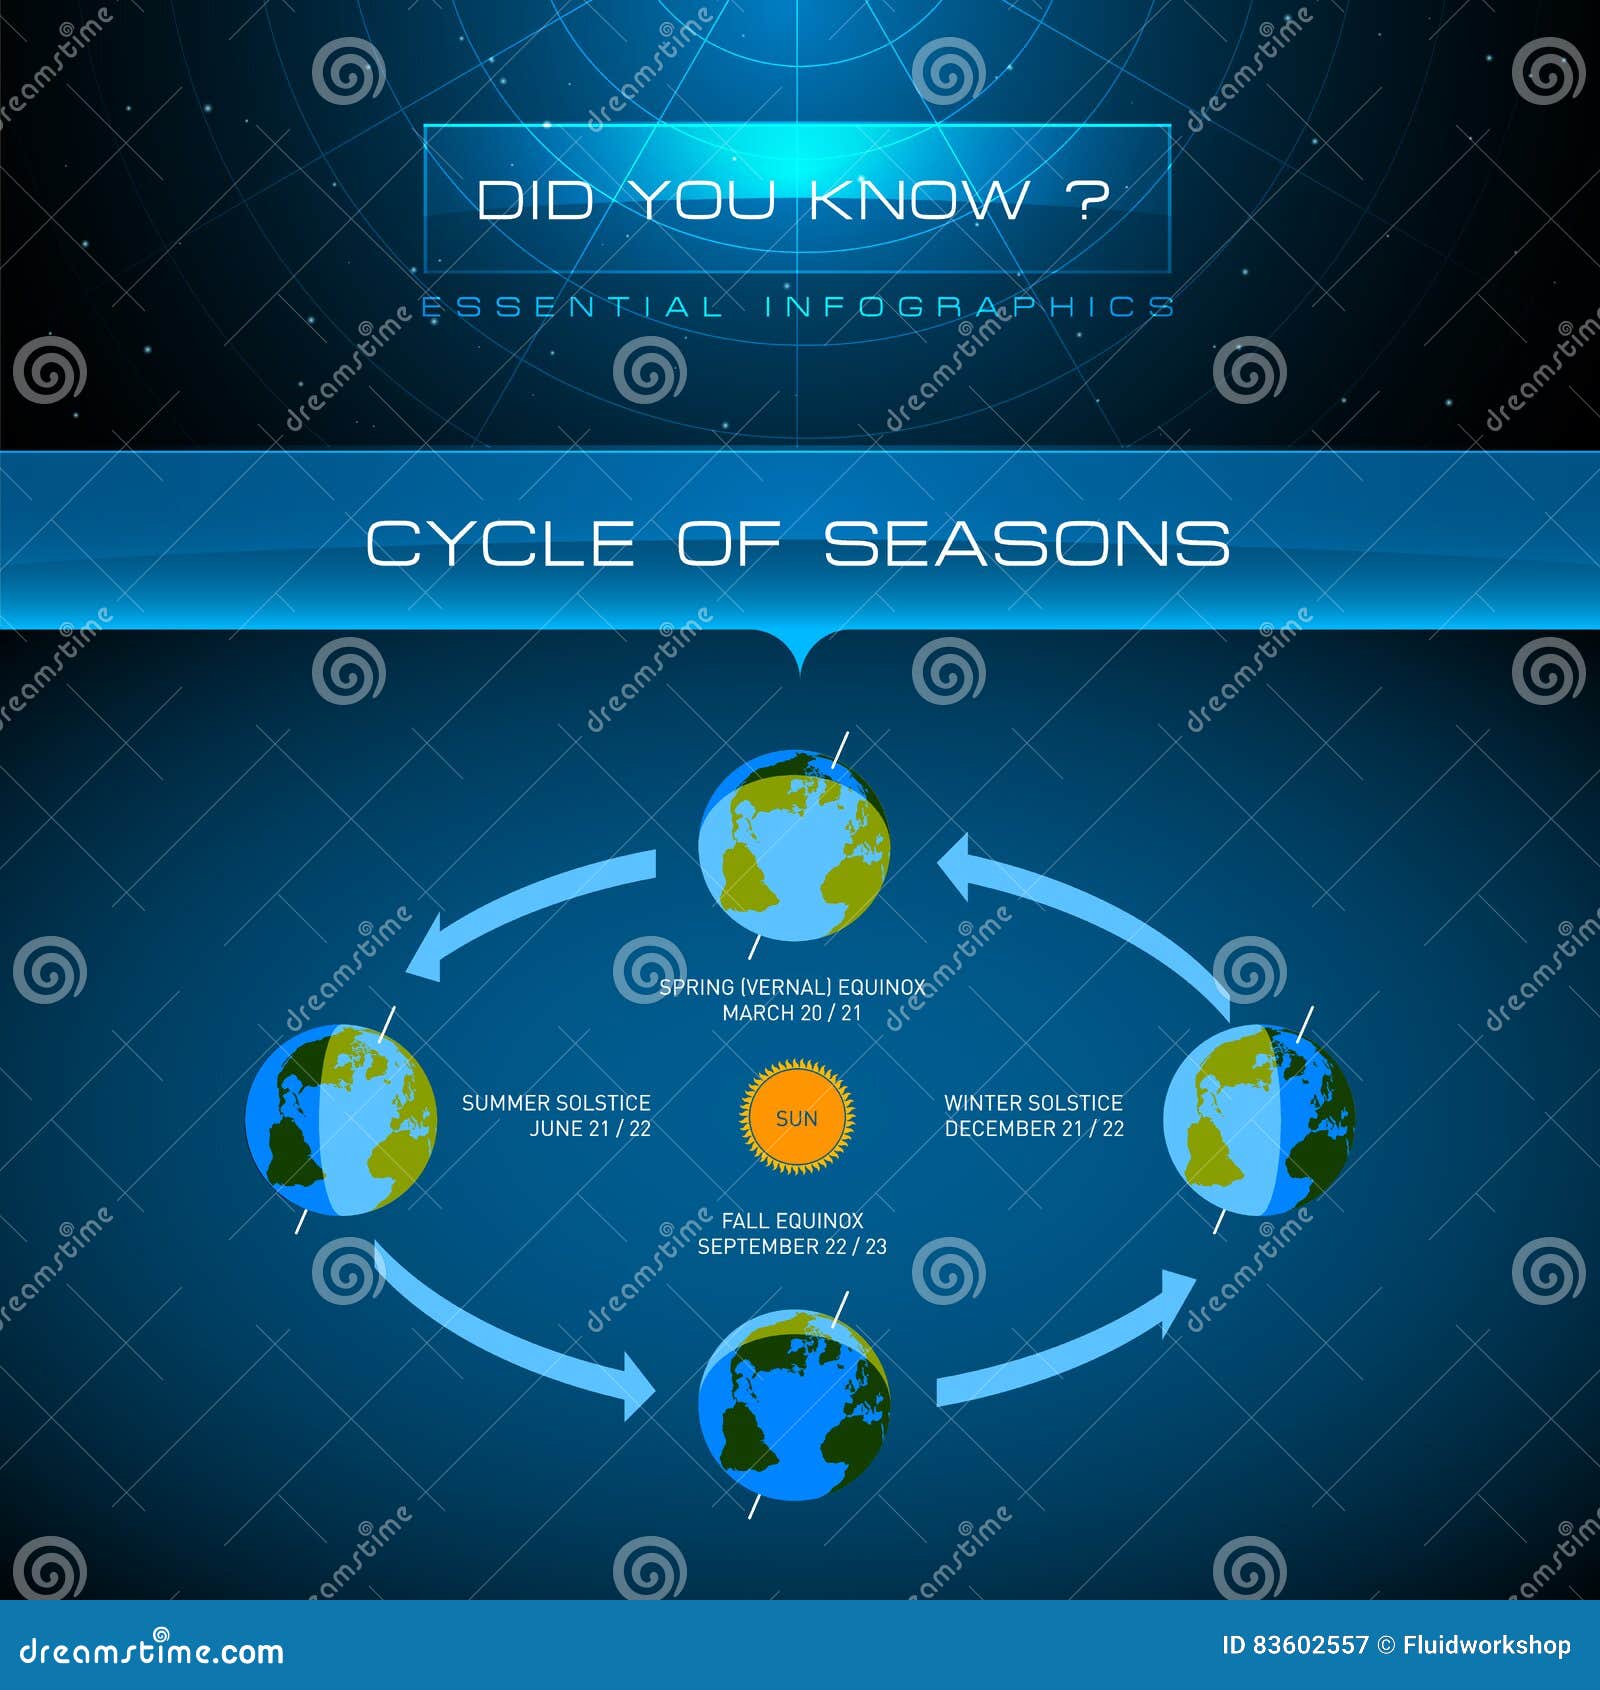 Vector Infographic - Cycle of Seasons Stock Vector - Illustration of